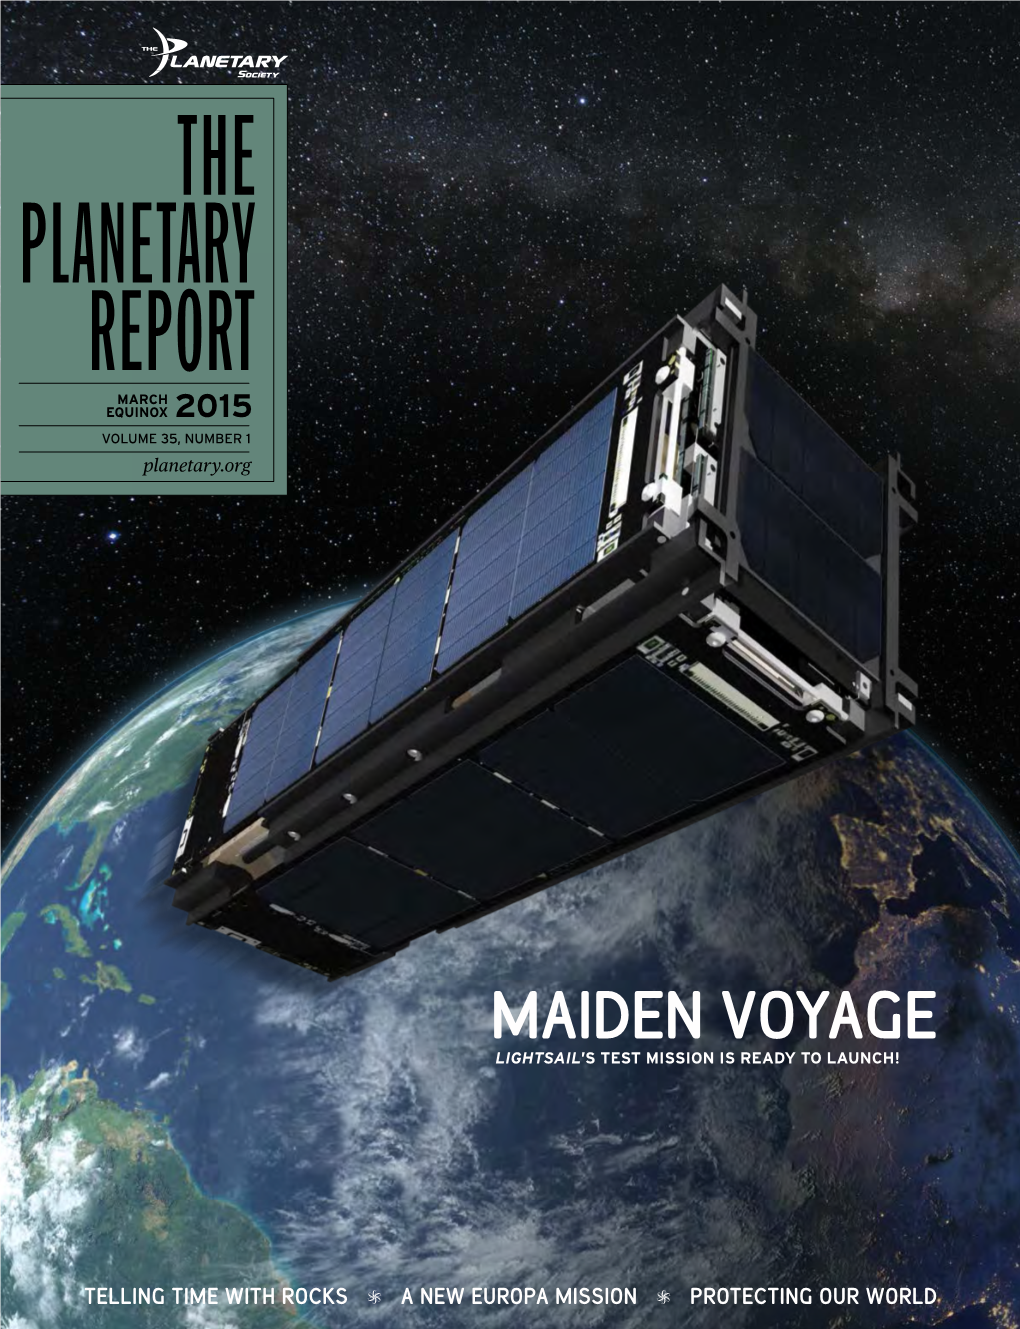 THE PLANETARY REPORT MARCH EQUINOX 2015 VOLUME 35, NUMBER 1 Planetary.Org